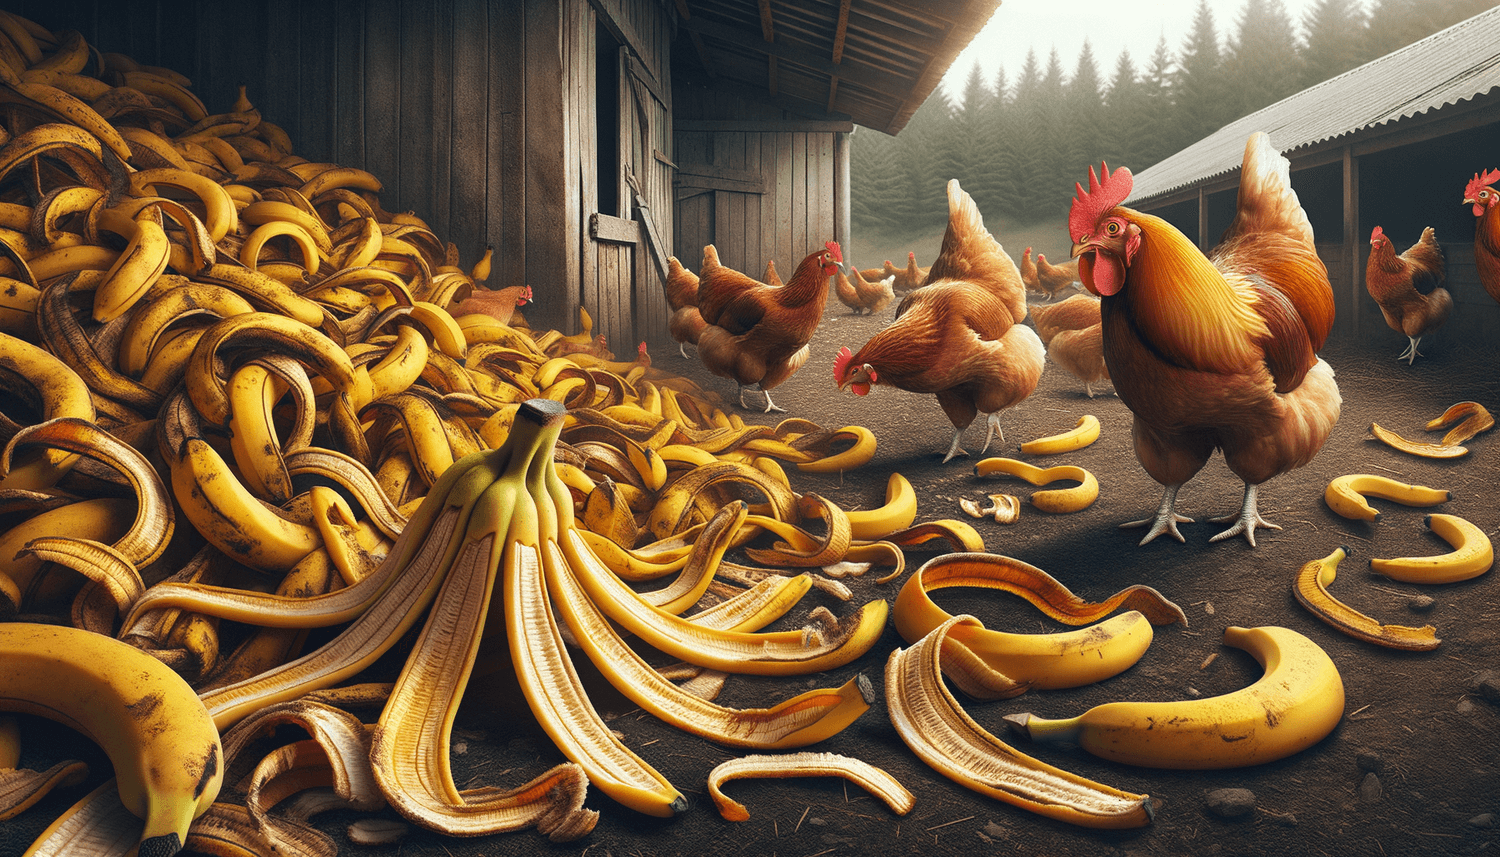 Can Chickens Eat Bananas Peels?